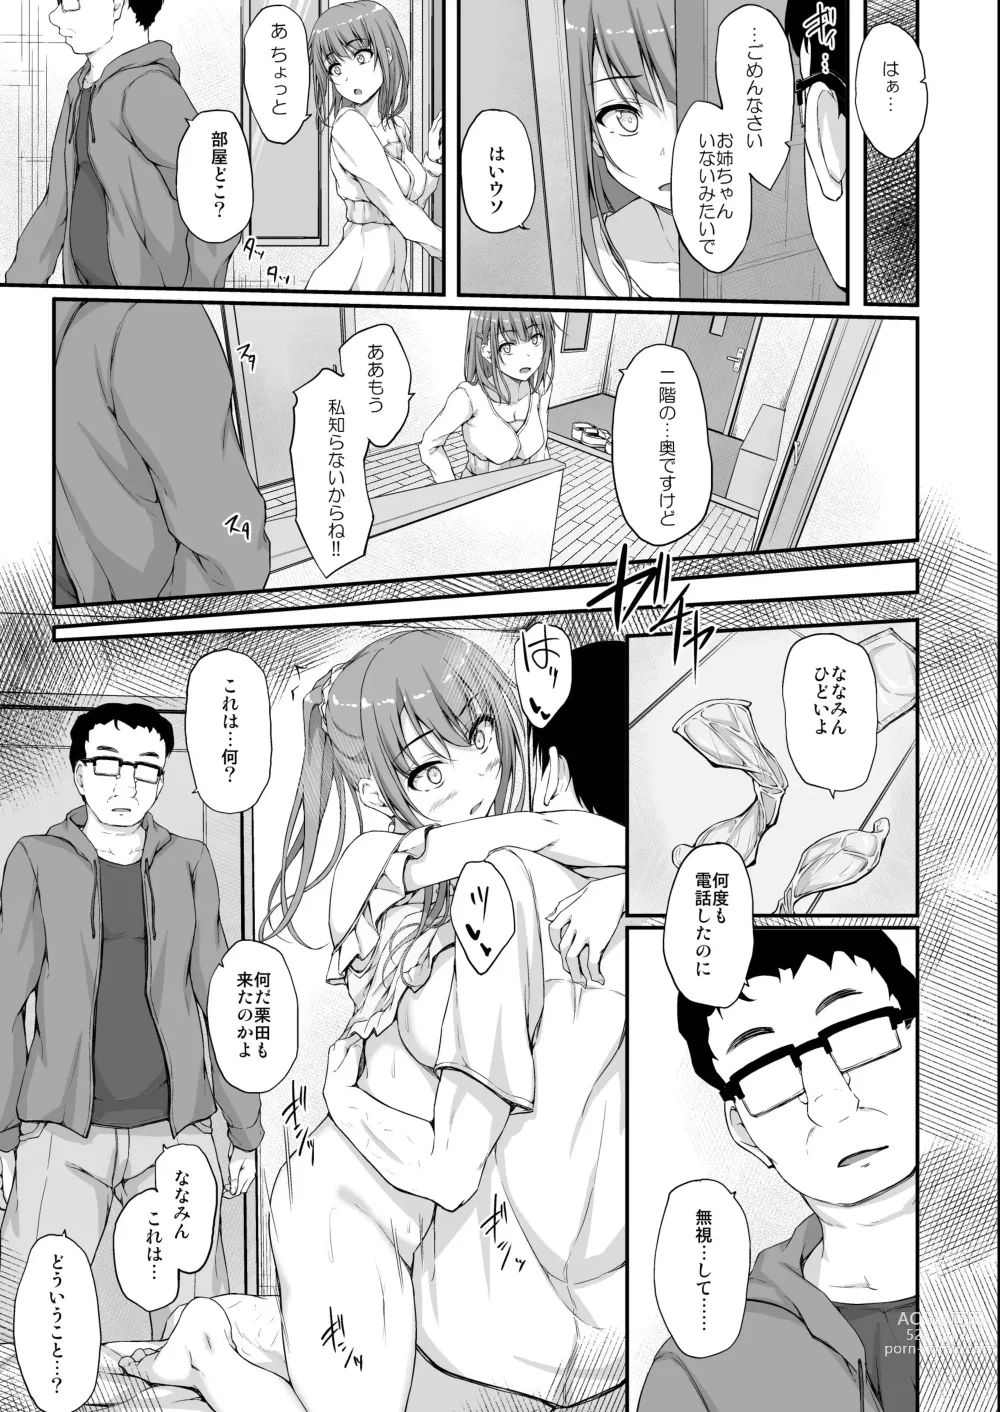 Page 27 of doujinshi Re:Temptation 5